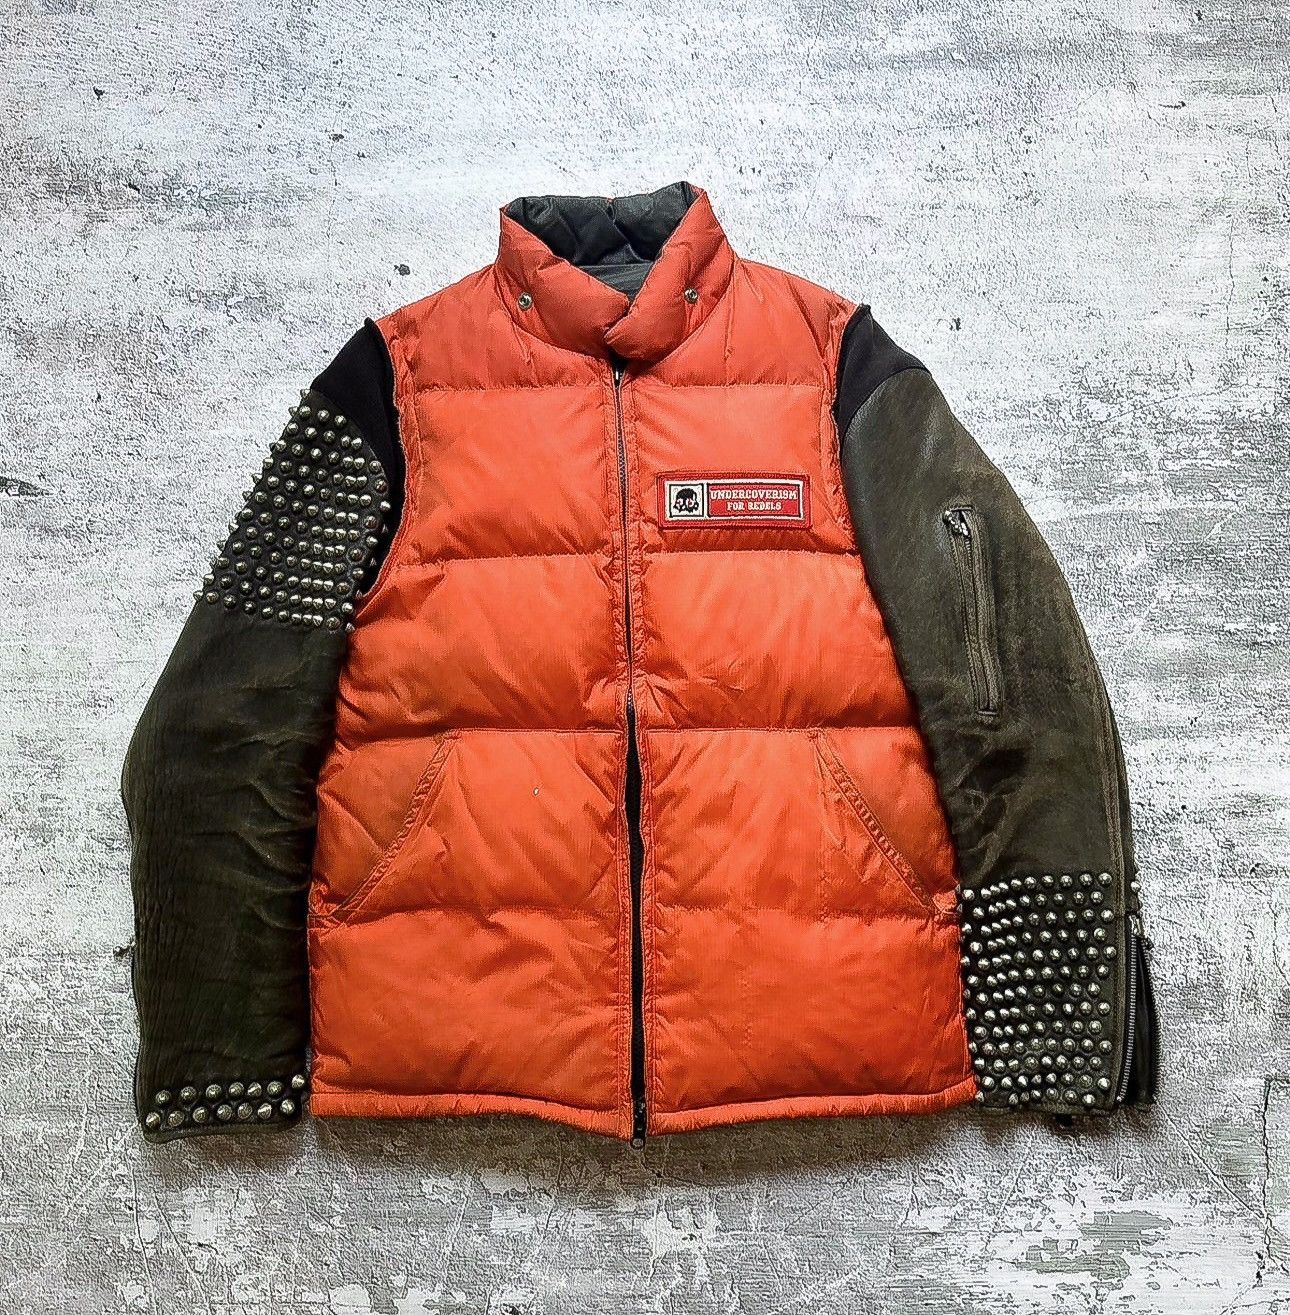 Undercover Undercover AW05 “Arts And Crafts” Studded Puffer jacket 